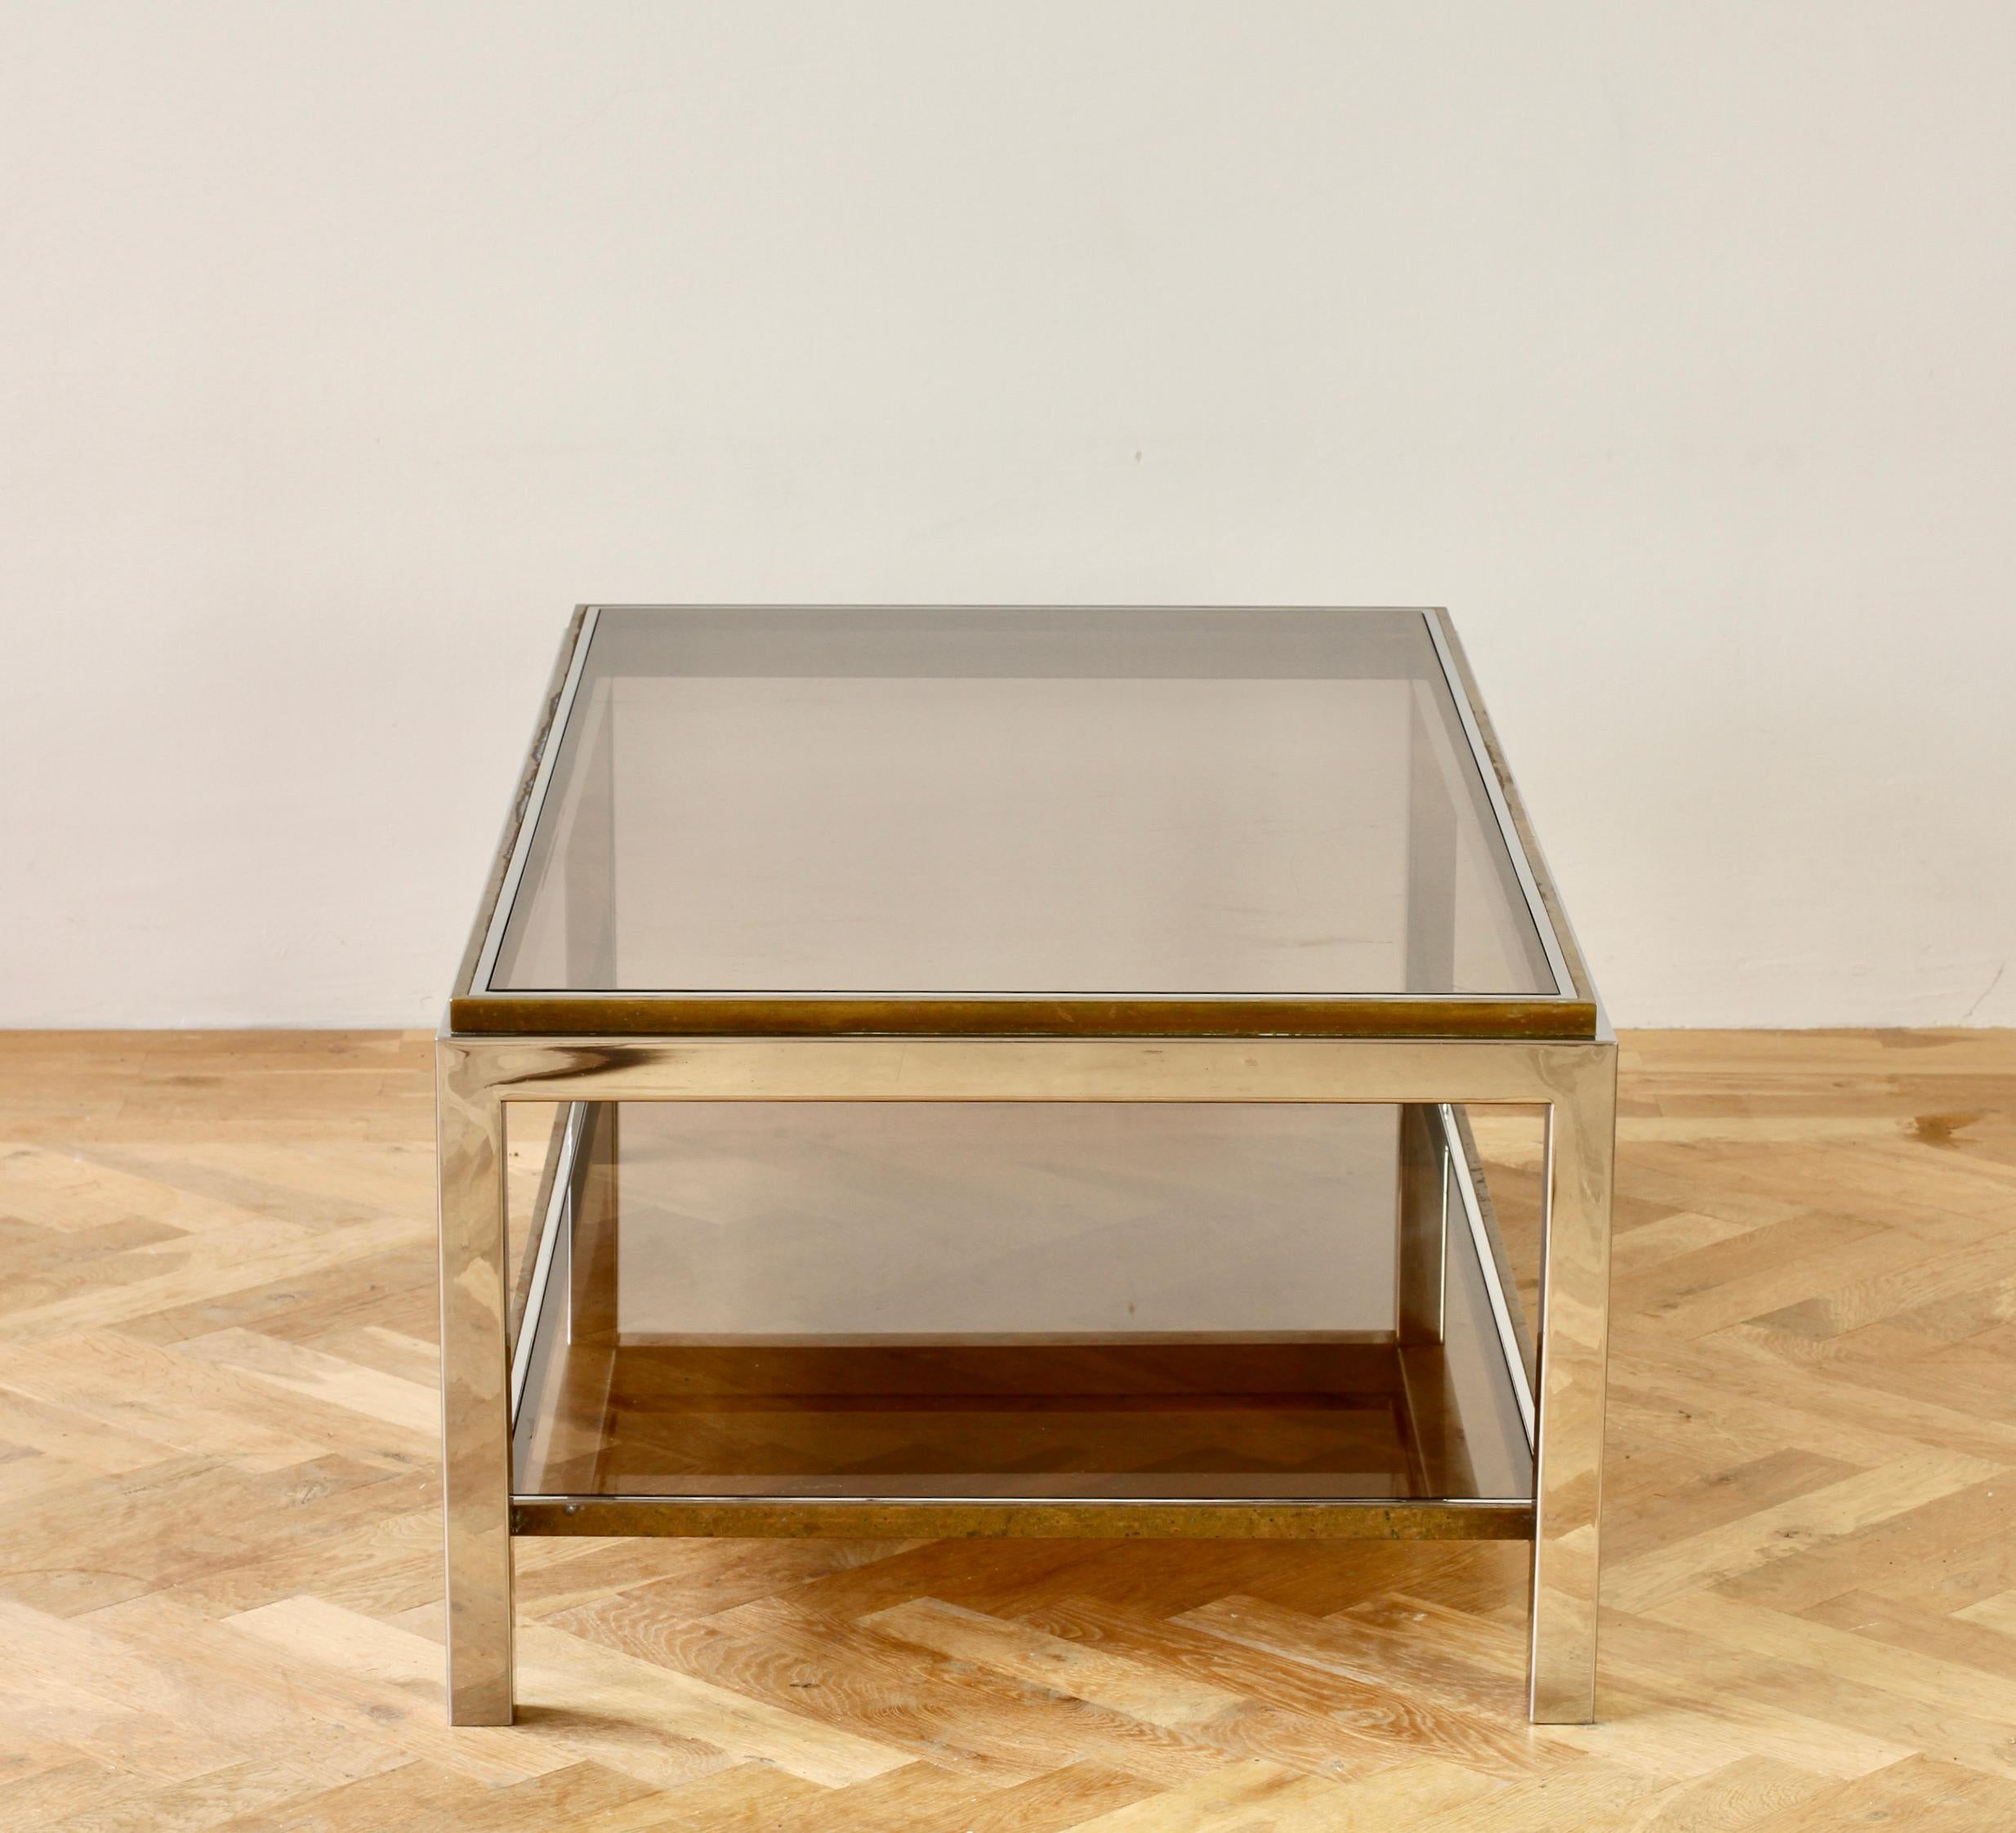 Plated Willy Rizzo Style Mid-Century Brass and Chrome Bicolor Coffee Table, circa 1970s For Sale